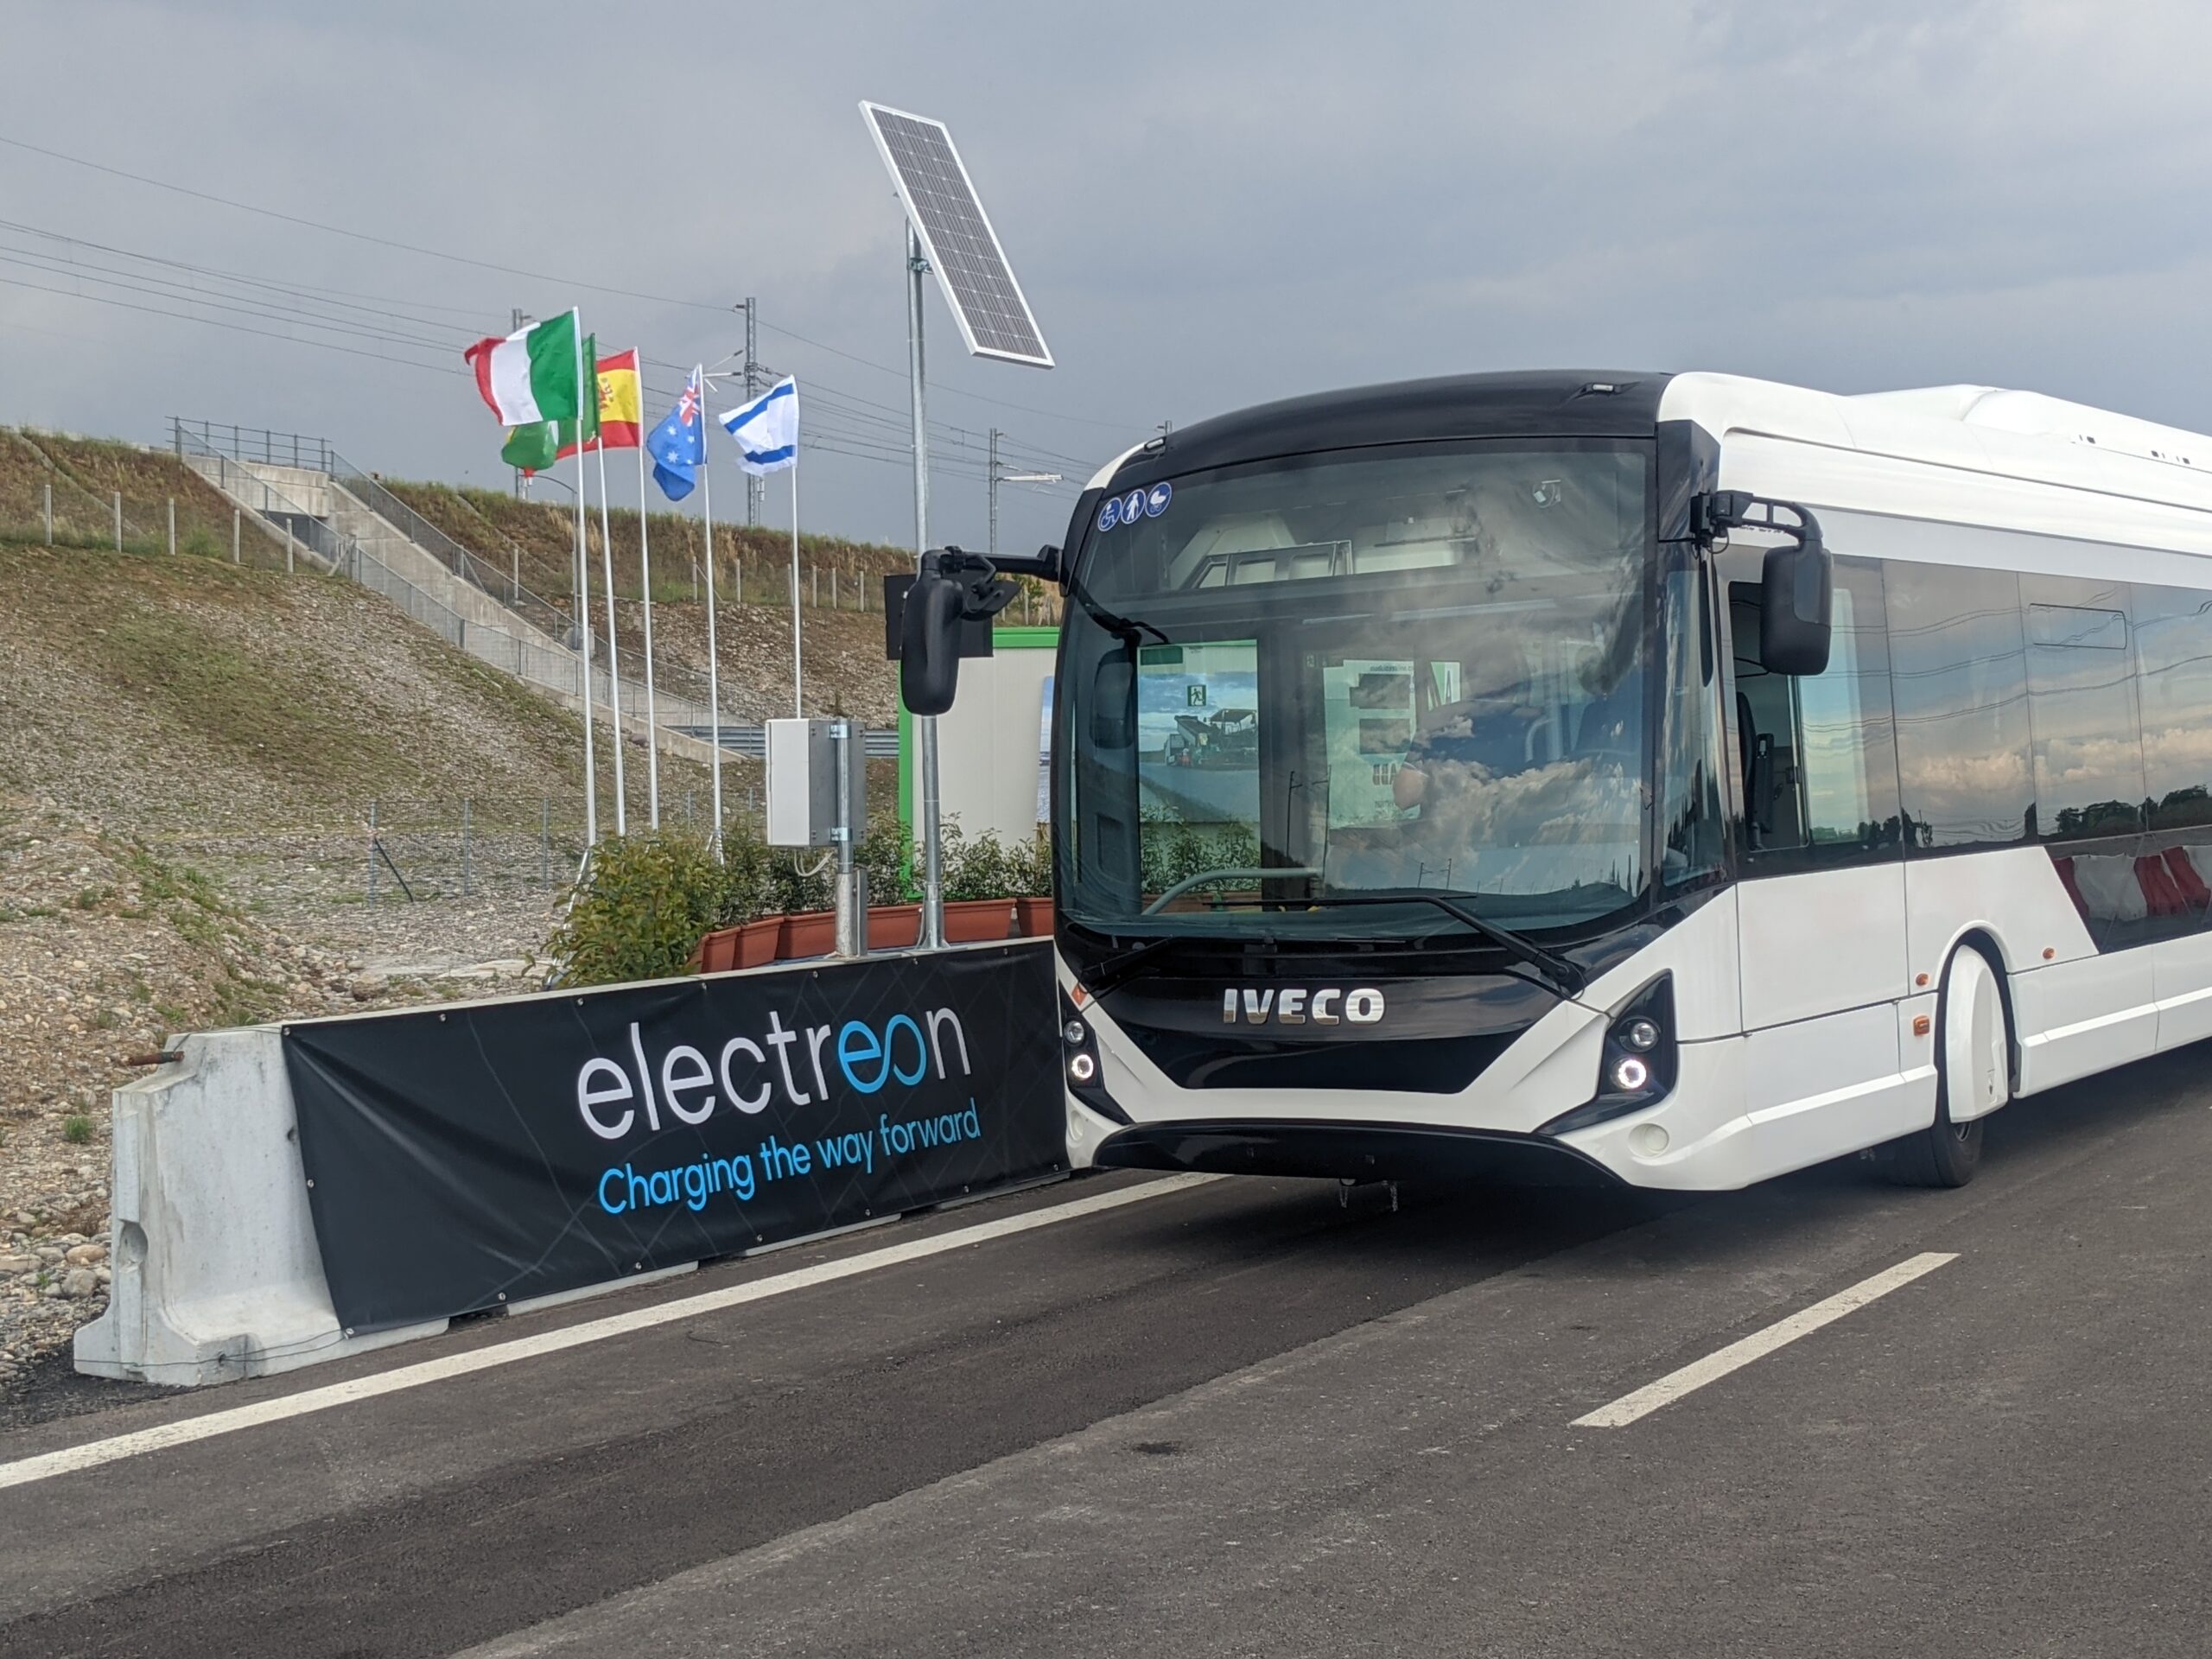 Iveco bus charging over Electreon's wireless road at the Arena of the Future inauguration